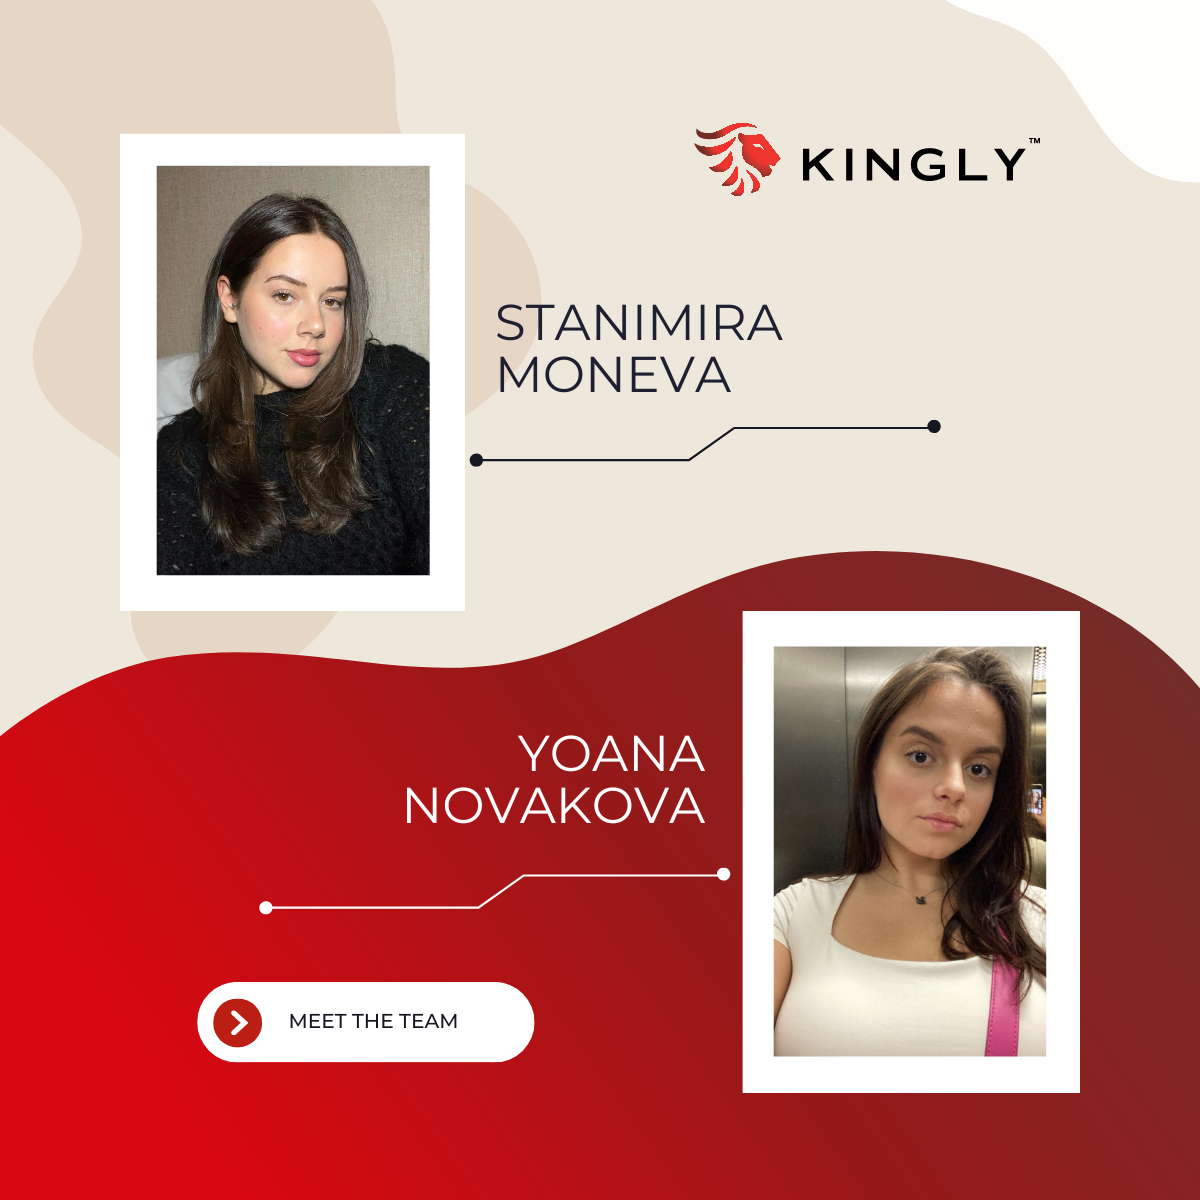 Kingly welcome 2 Sales and Marketing Interns